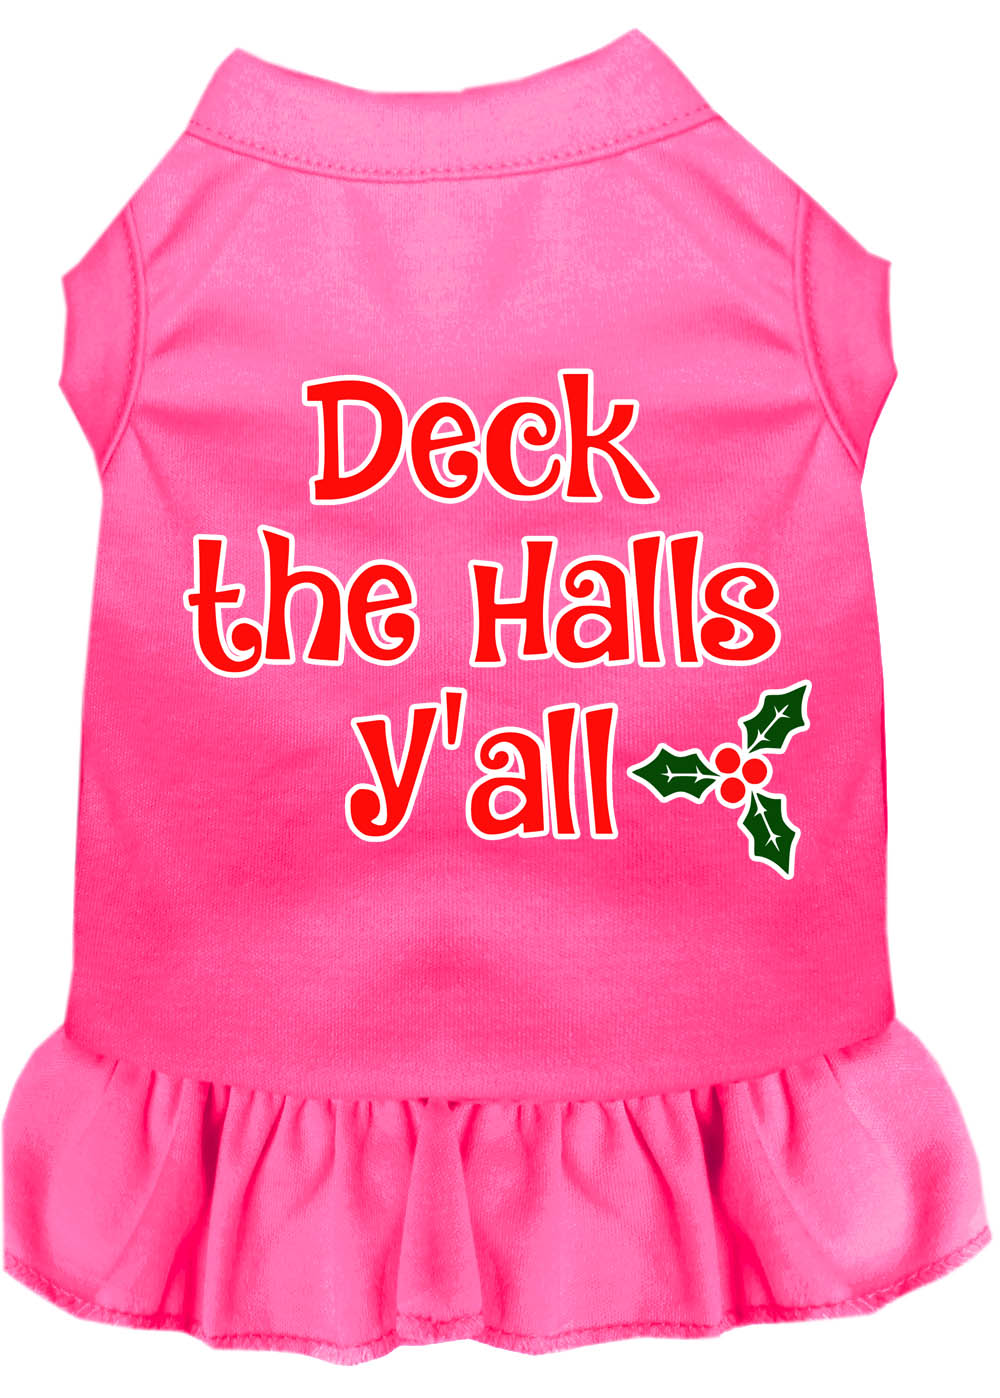 Deck the Halls Y'all Screen Print Dog Dress Bright Pink Med